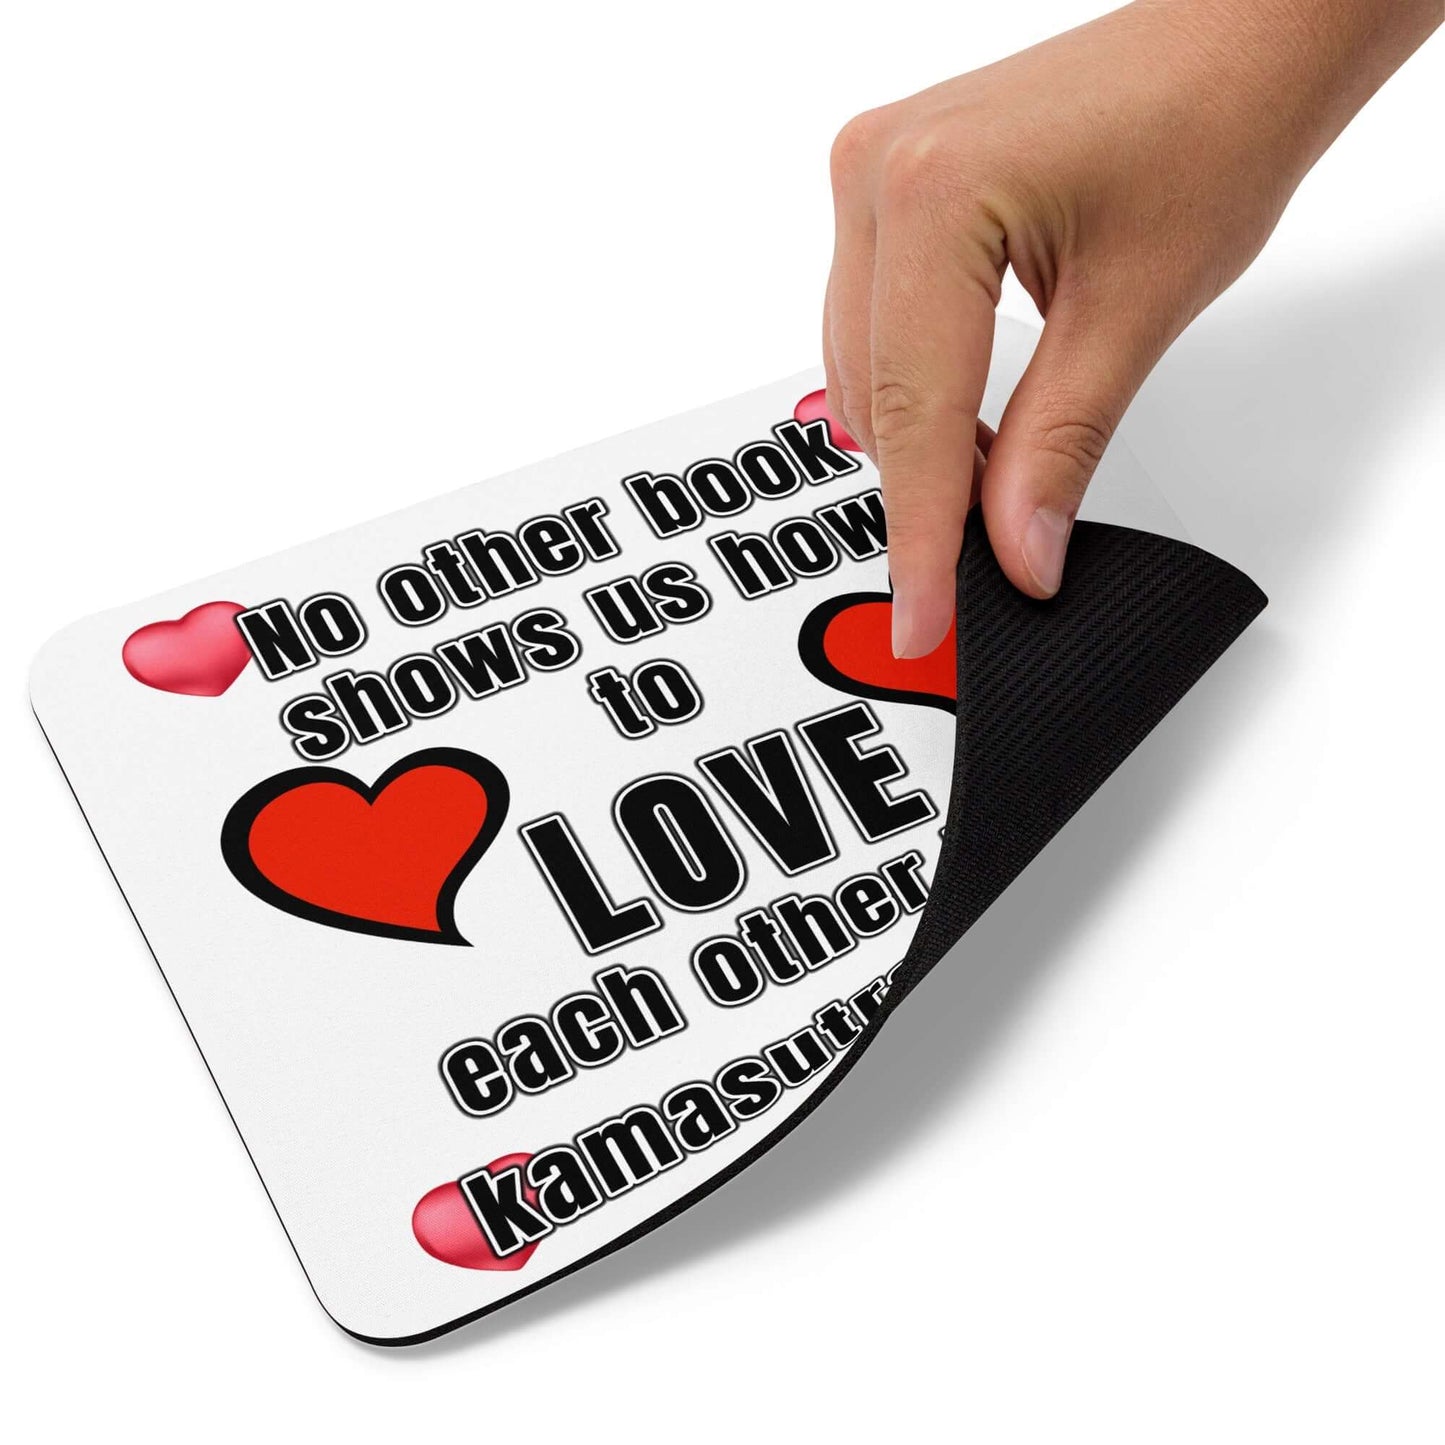 No other book shows us how to love each other like the Kamasutra does - Mouse pad - Horrible Designs